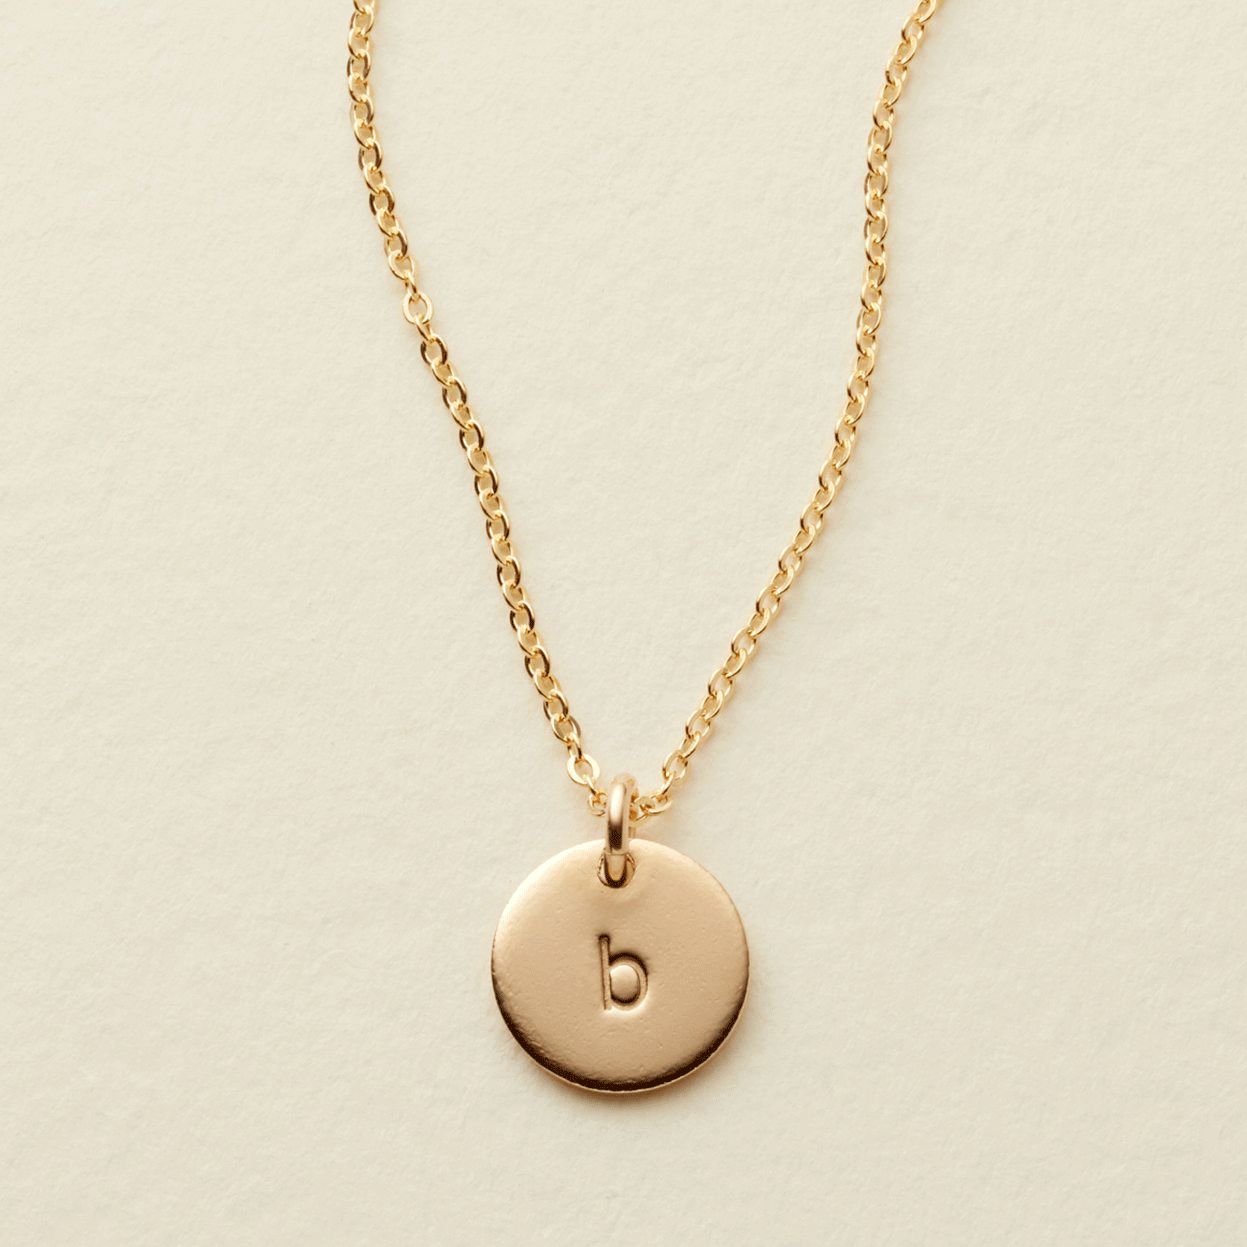 Initial Disc Necklace - 3/8" | Made by Mary (US)